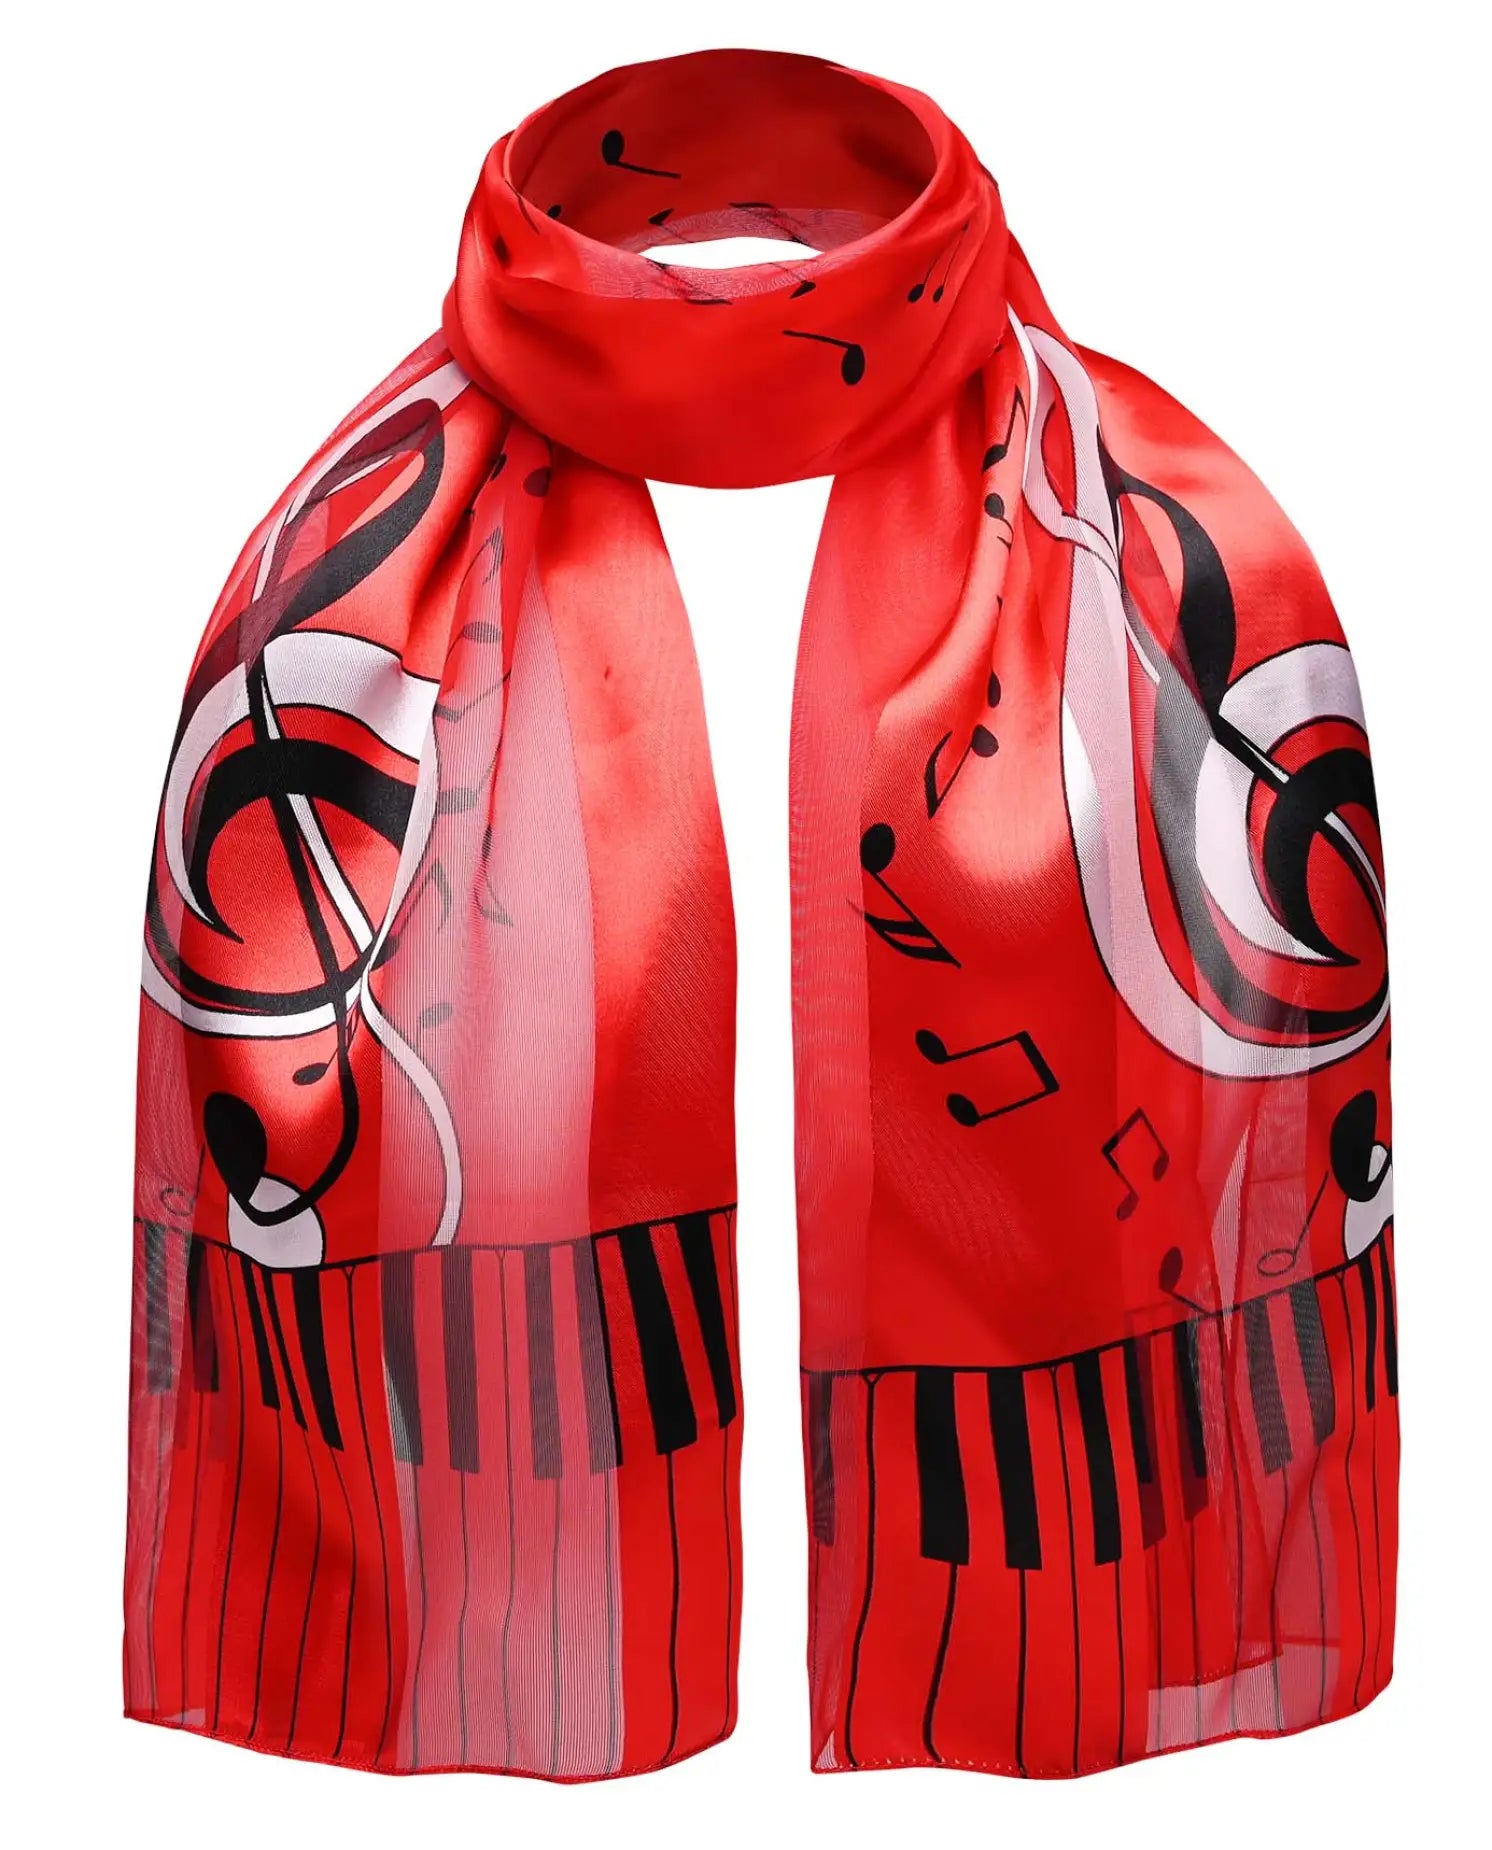 Red satin stripe scarf with piano clef note design